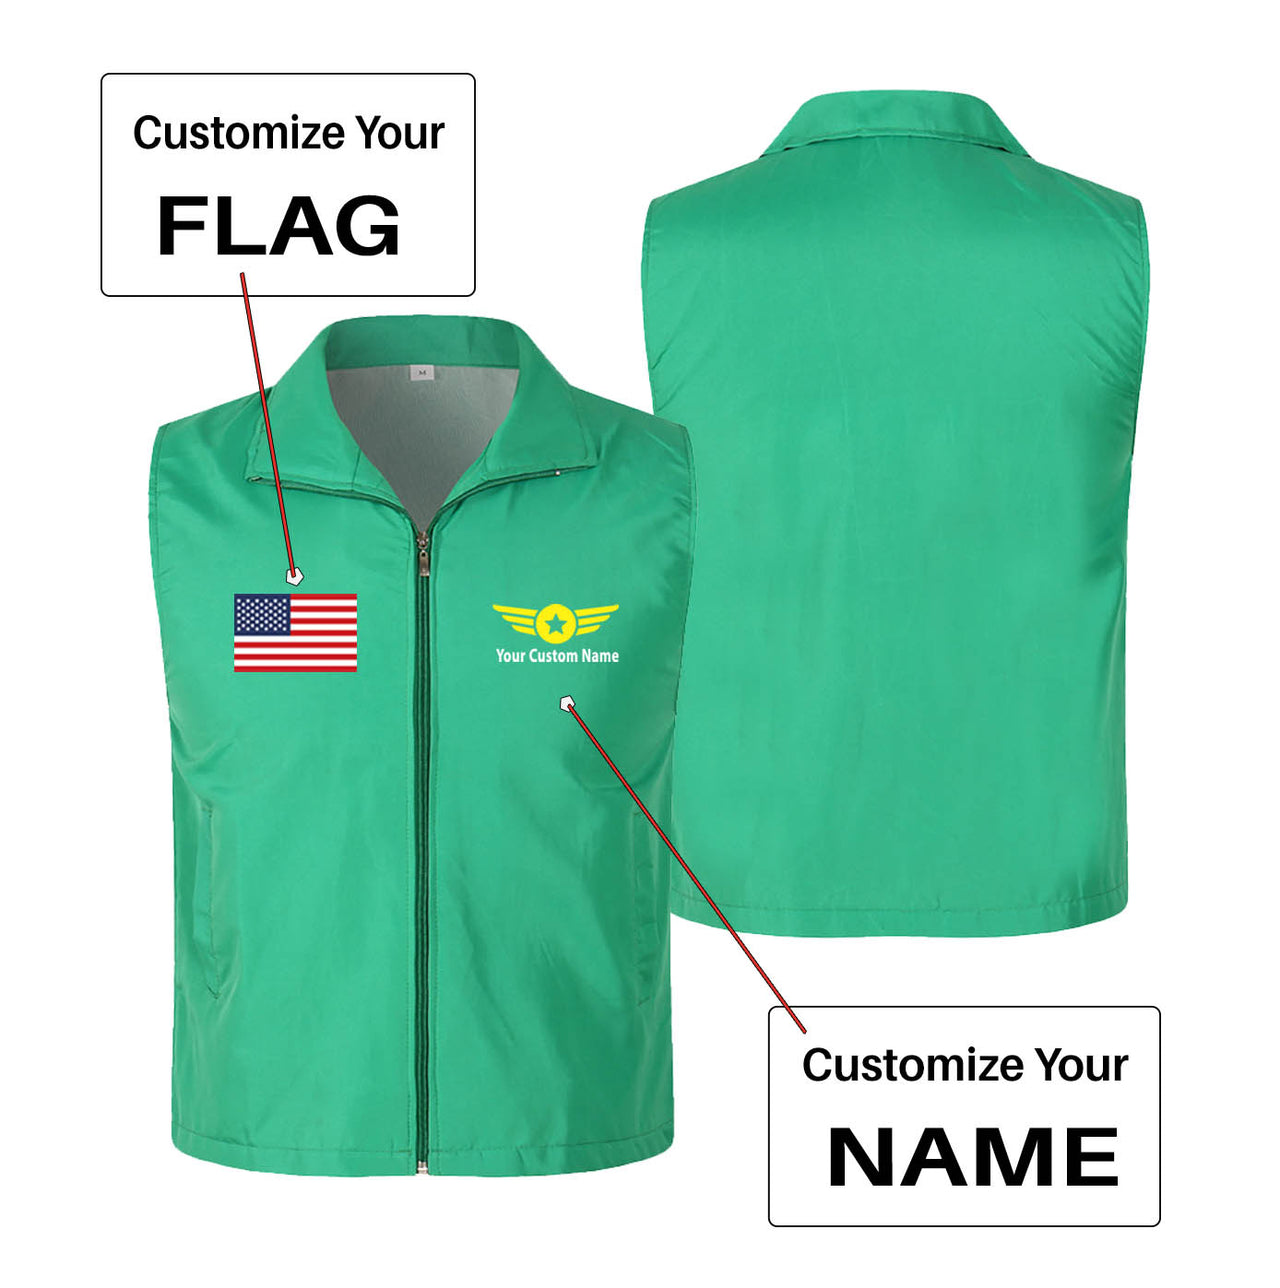 Custom Flag & Name with "Badge 4" Designed Thin Style Vests